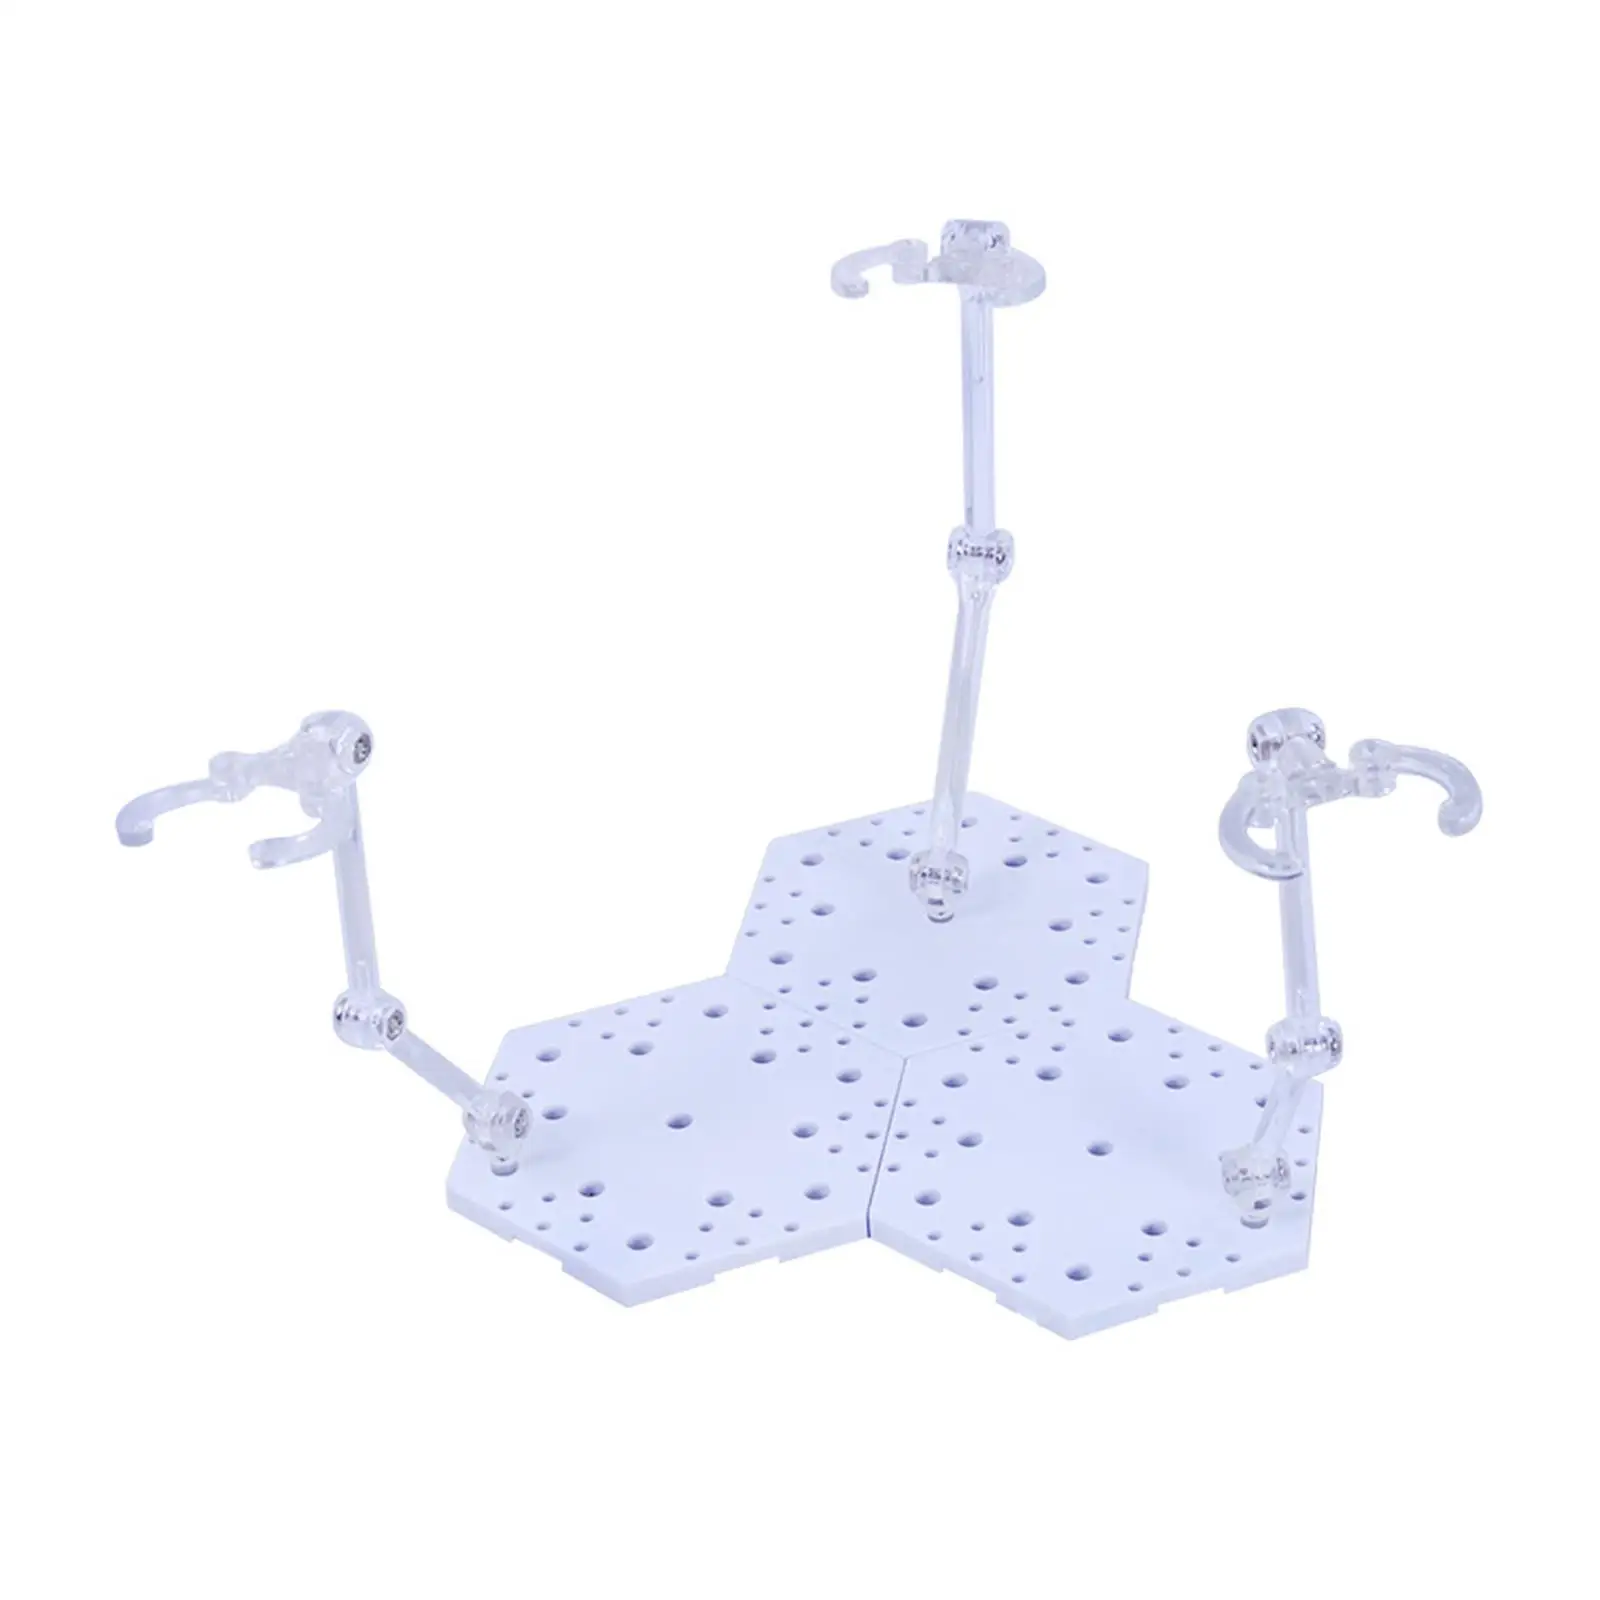 Sturdy Figure Base Display Rack Stand Support Bracket Holder for 1/144 Model Figures Toys DIY Accessories